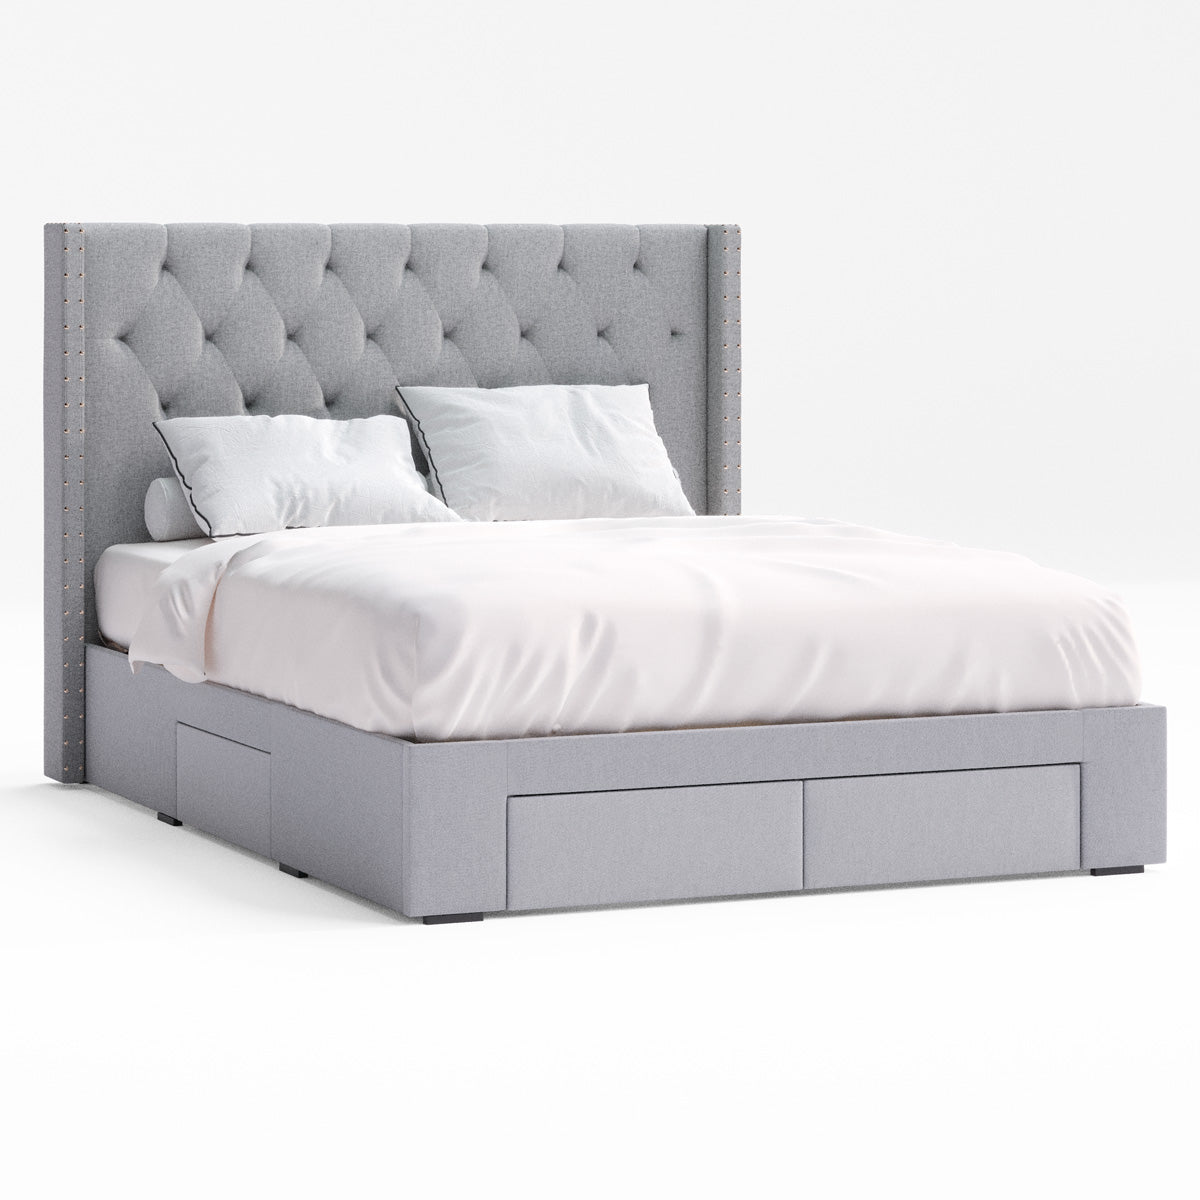 Leonora Wing Bed Frame with Four Storage Drawers (Grey Fabric)